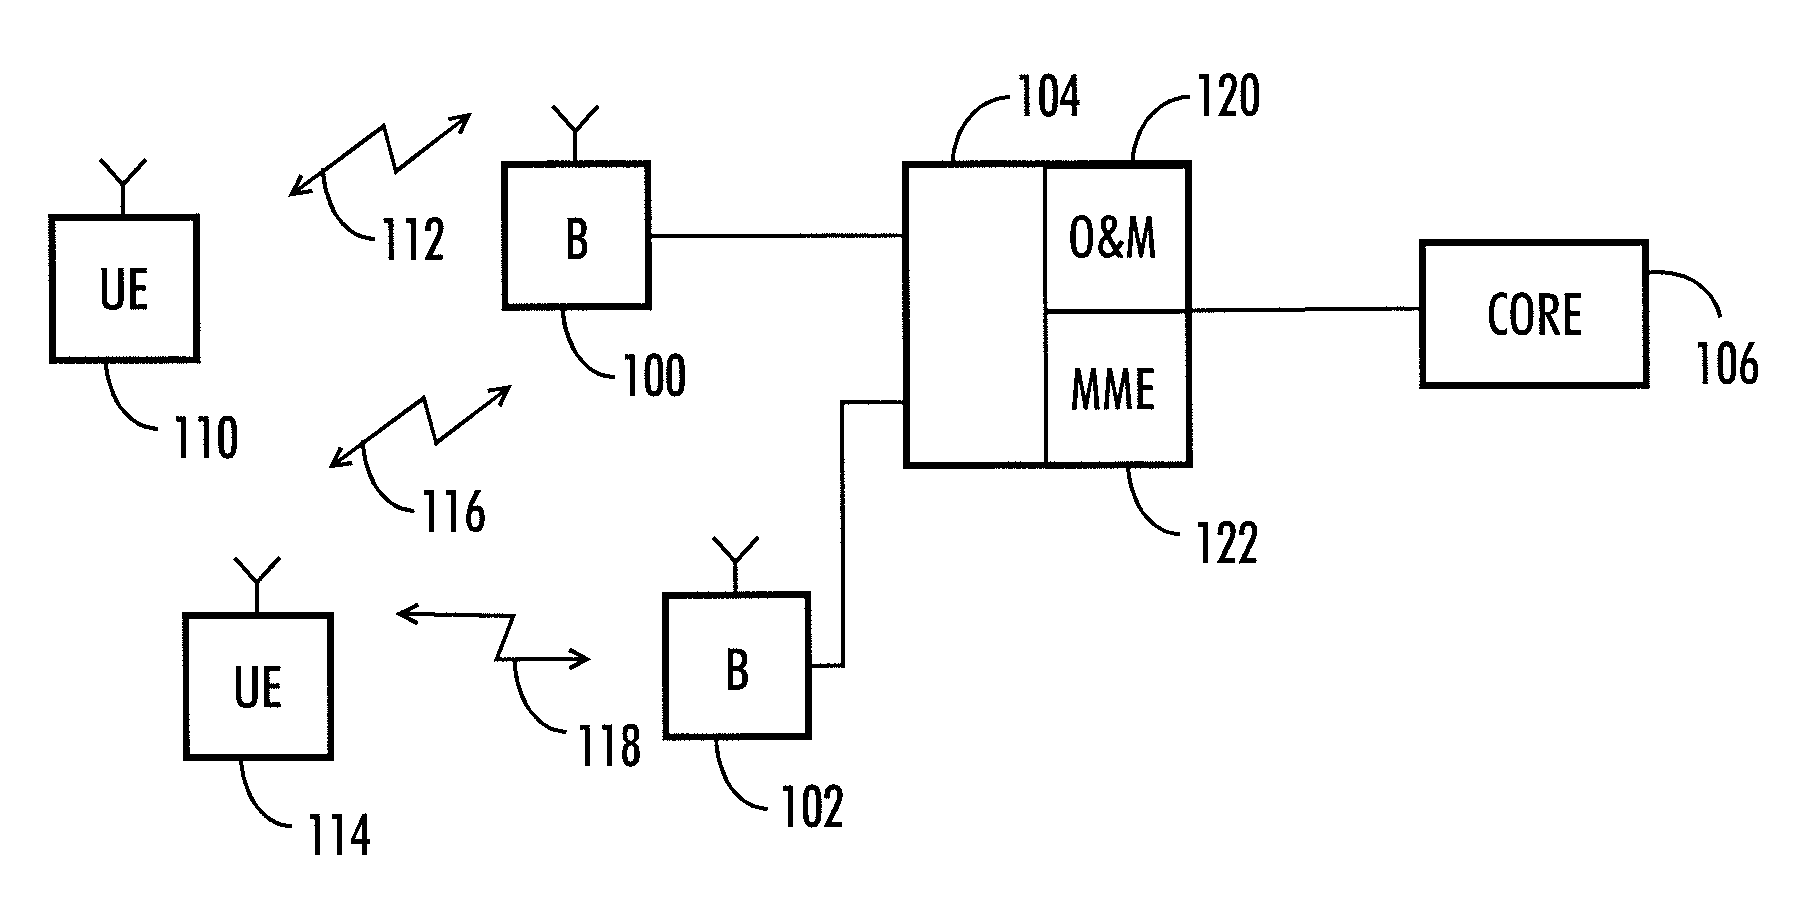 Apparatus and Method for Single User Multiple Input Multiple Output Communication Employing Cyclic Shifts